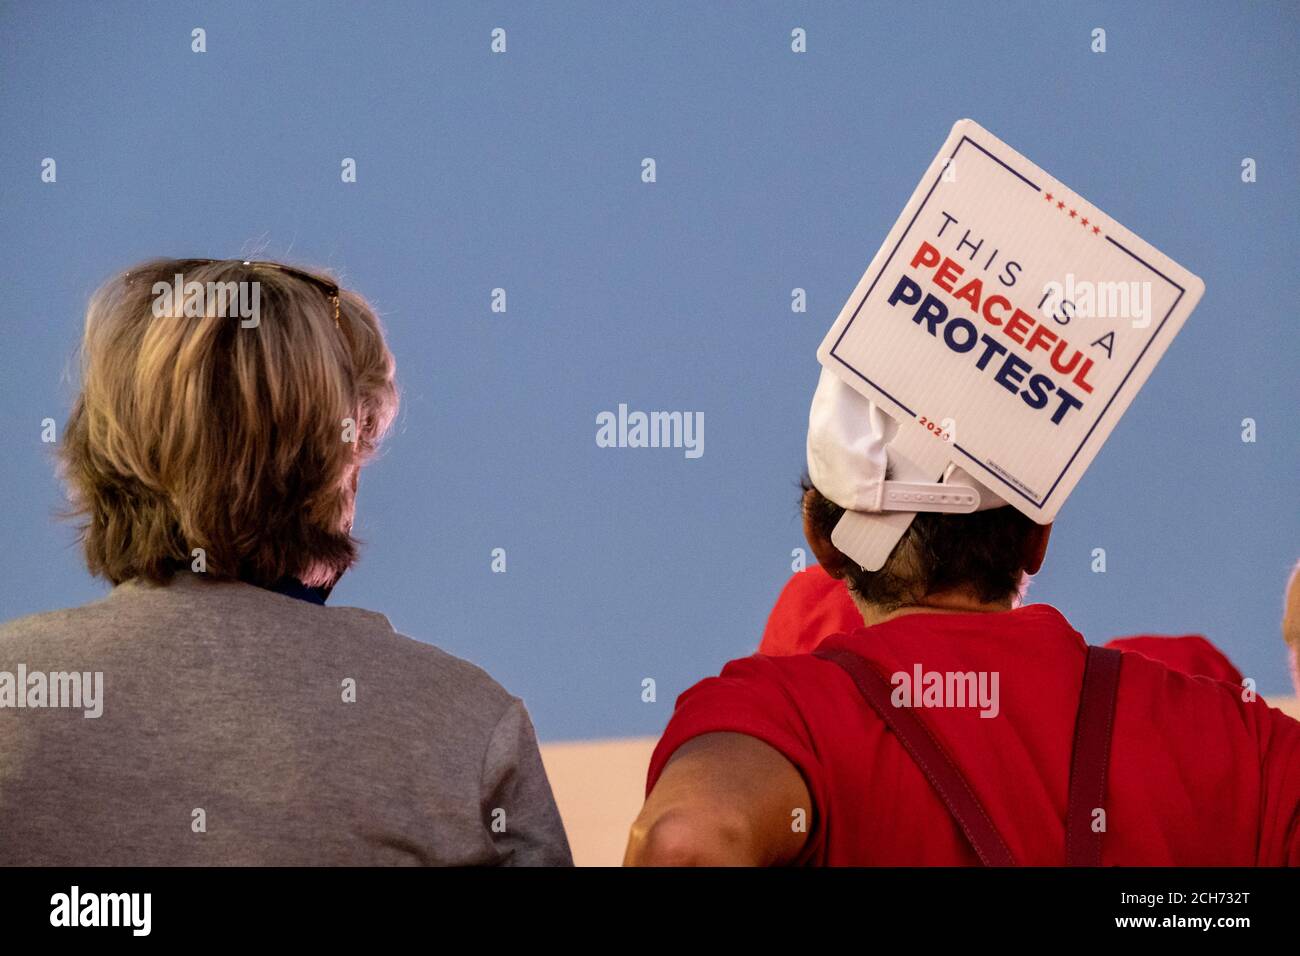 Henderson, NV, USA. 13th Sep, 2020. A woman displays a 'This is a peaceful protest' sign outside Xtreme Manufacturing, the venue for a packed Trump campaign event.The venue was filled to capacity and much of the crowd had overflowed outside onto the street. Credit: Young G. Kim/Alamy Live News Stock Photo